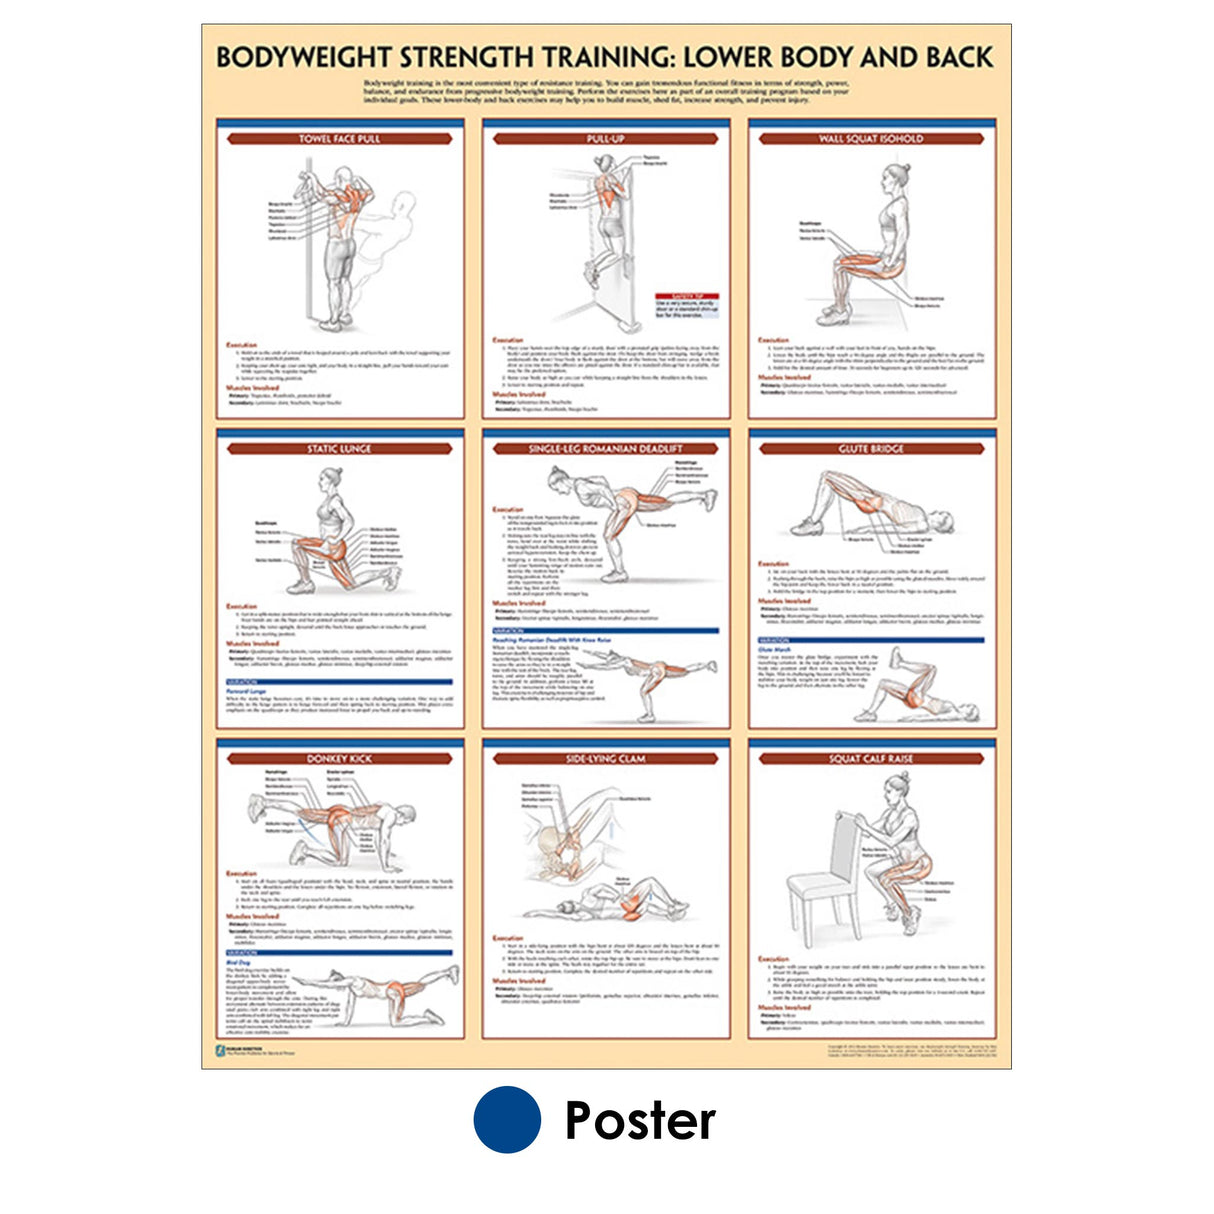 Bodyweight Strength Training Poster: Lower Body and Back – Human Kinetics